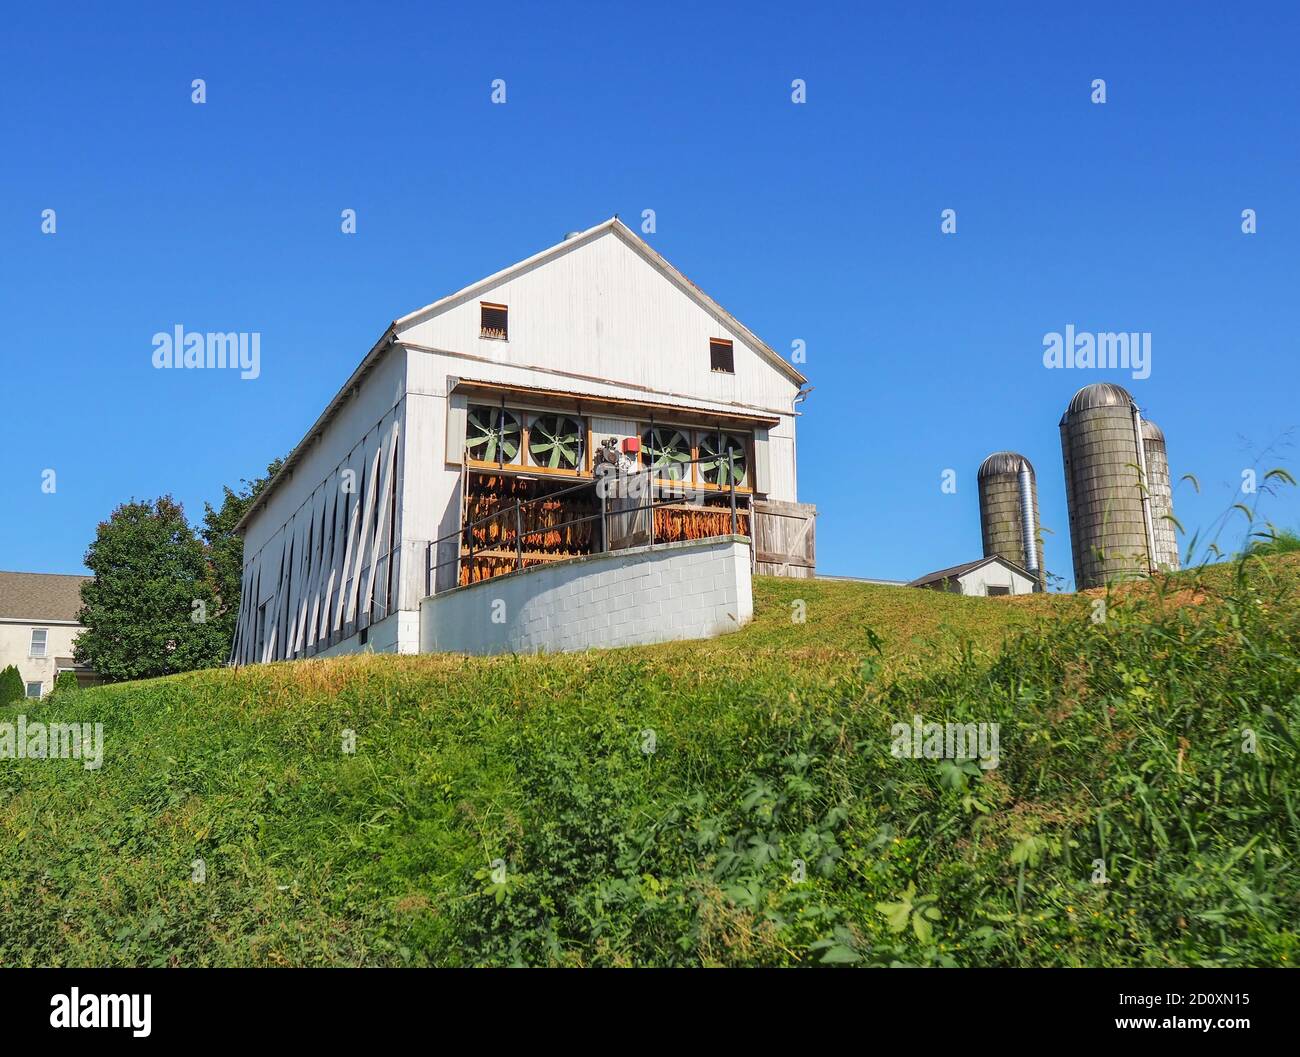 Tobacco hanging to dry in a white barn with big industrial fans, on a grassy green hill on a farm in the countryside under a clear blue sky. Stock Photo